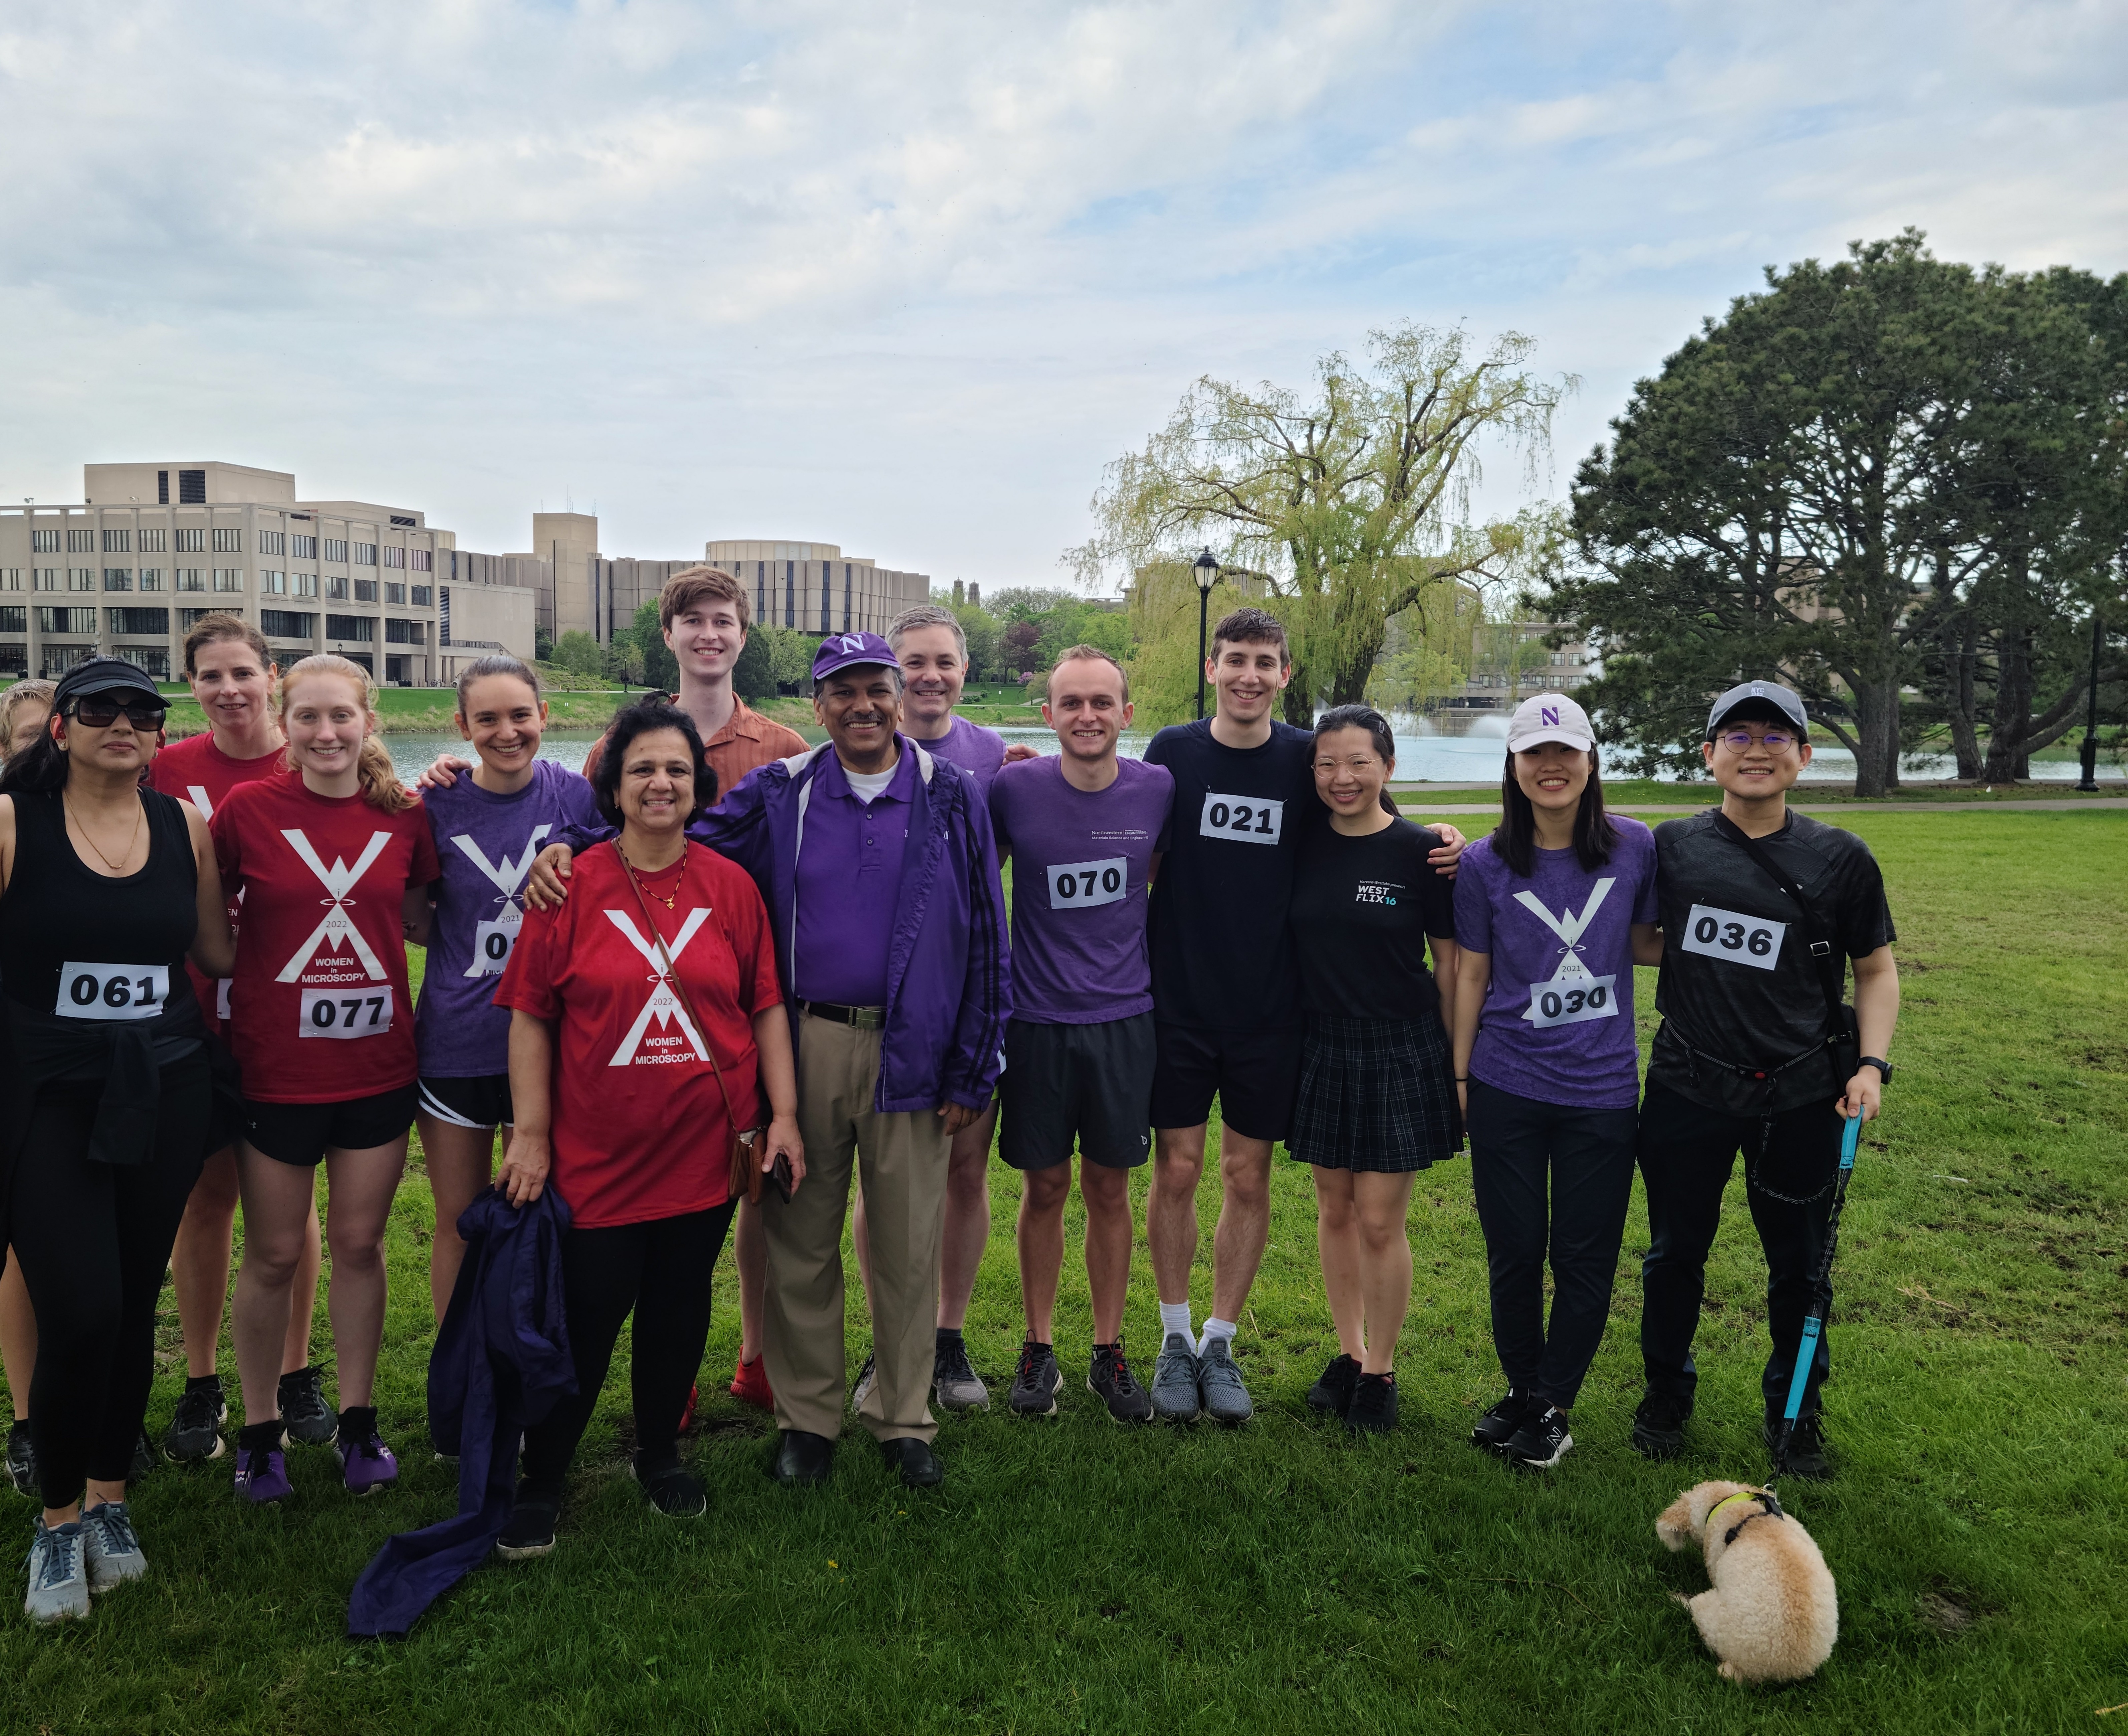 NUANCE & VPD Group run/walk participants--well done everyone!